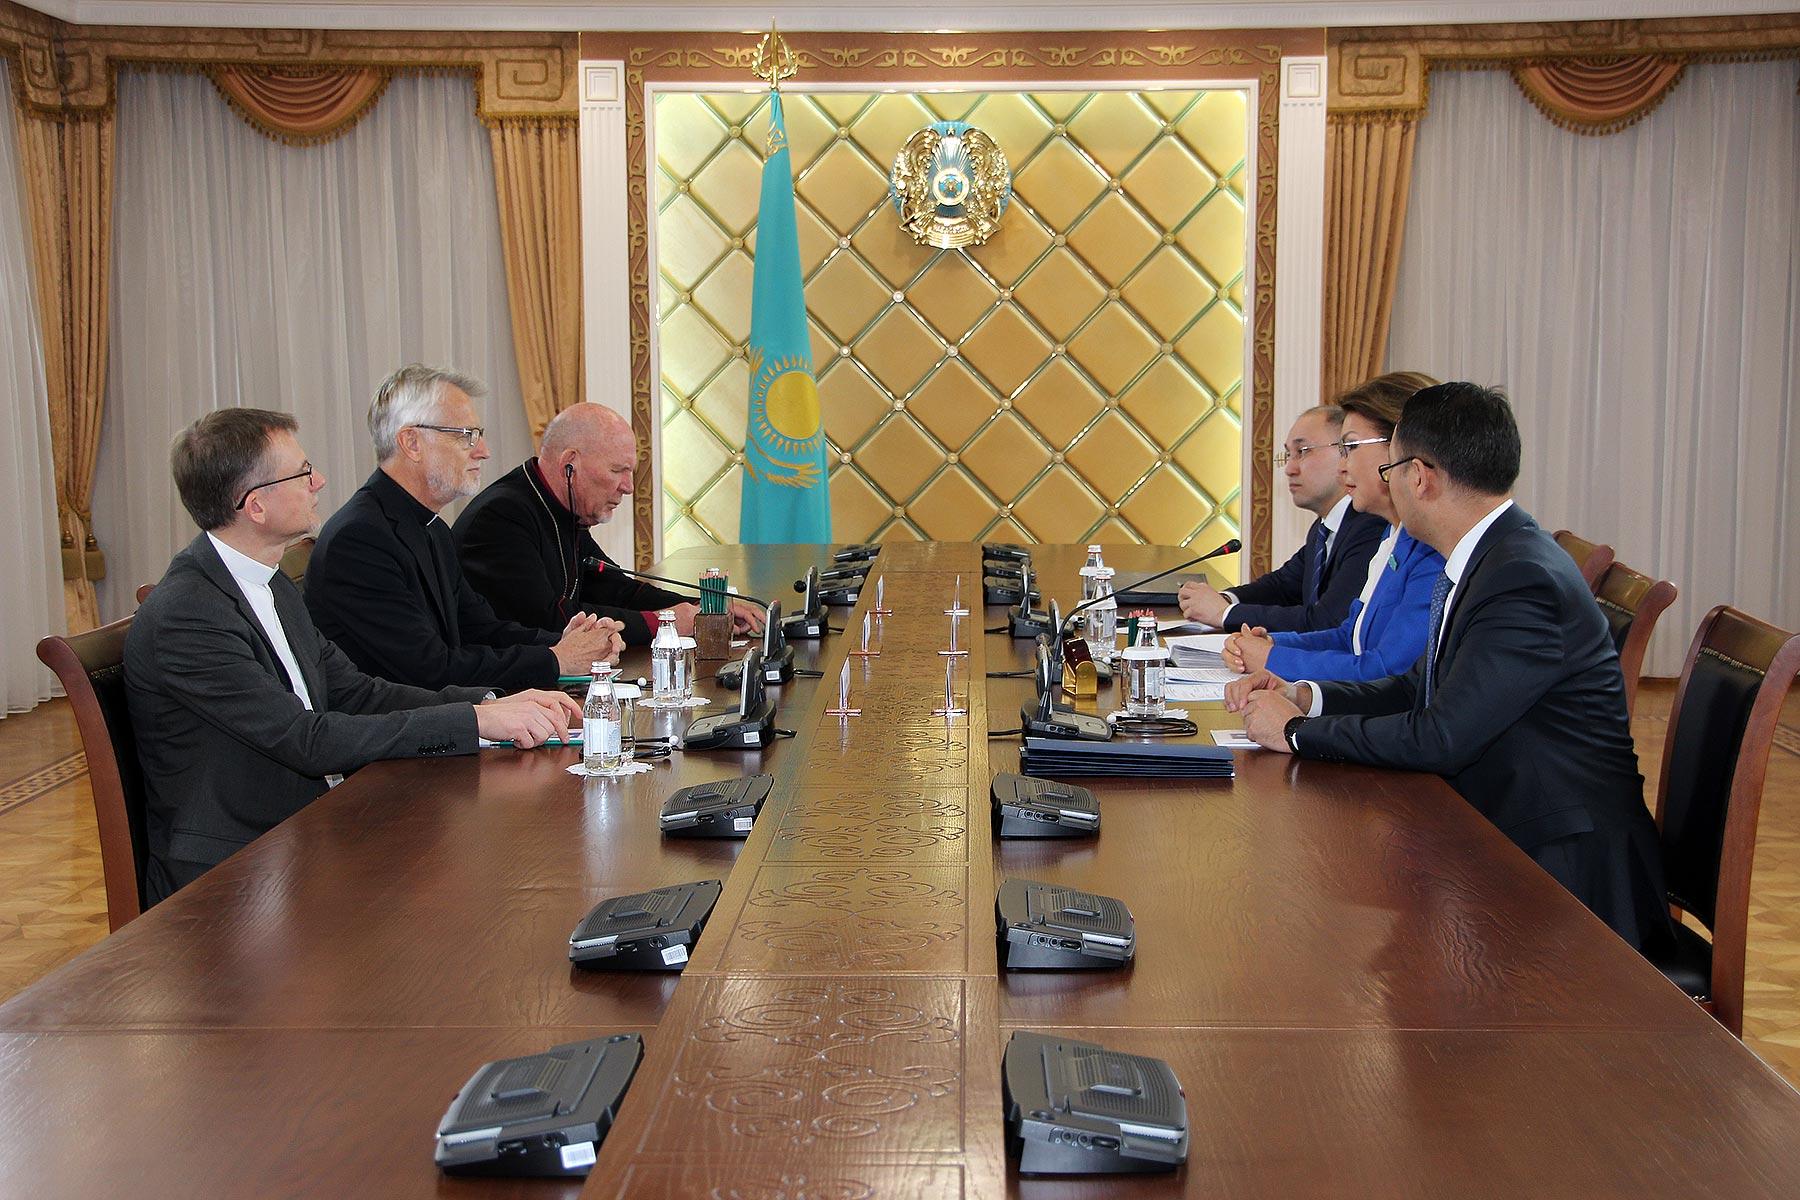 The LWF delegation with (from left) Area Secretary for Europe Ireneusz Lukas, General Secretary Martin Junge and Archbishop of the Evangelical Lutheran Church of Kazakhstan Jurij Novgorodov meeting with Dariga Nazarbayeva, Chairperson of the Senate of the Kazakh Parliament and Kazakh government officials. All photos: LWF/A. WeyermÃ¼ller